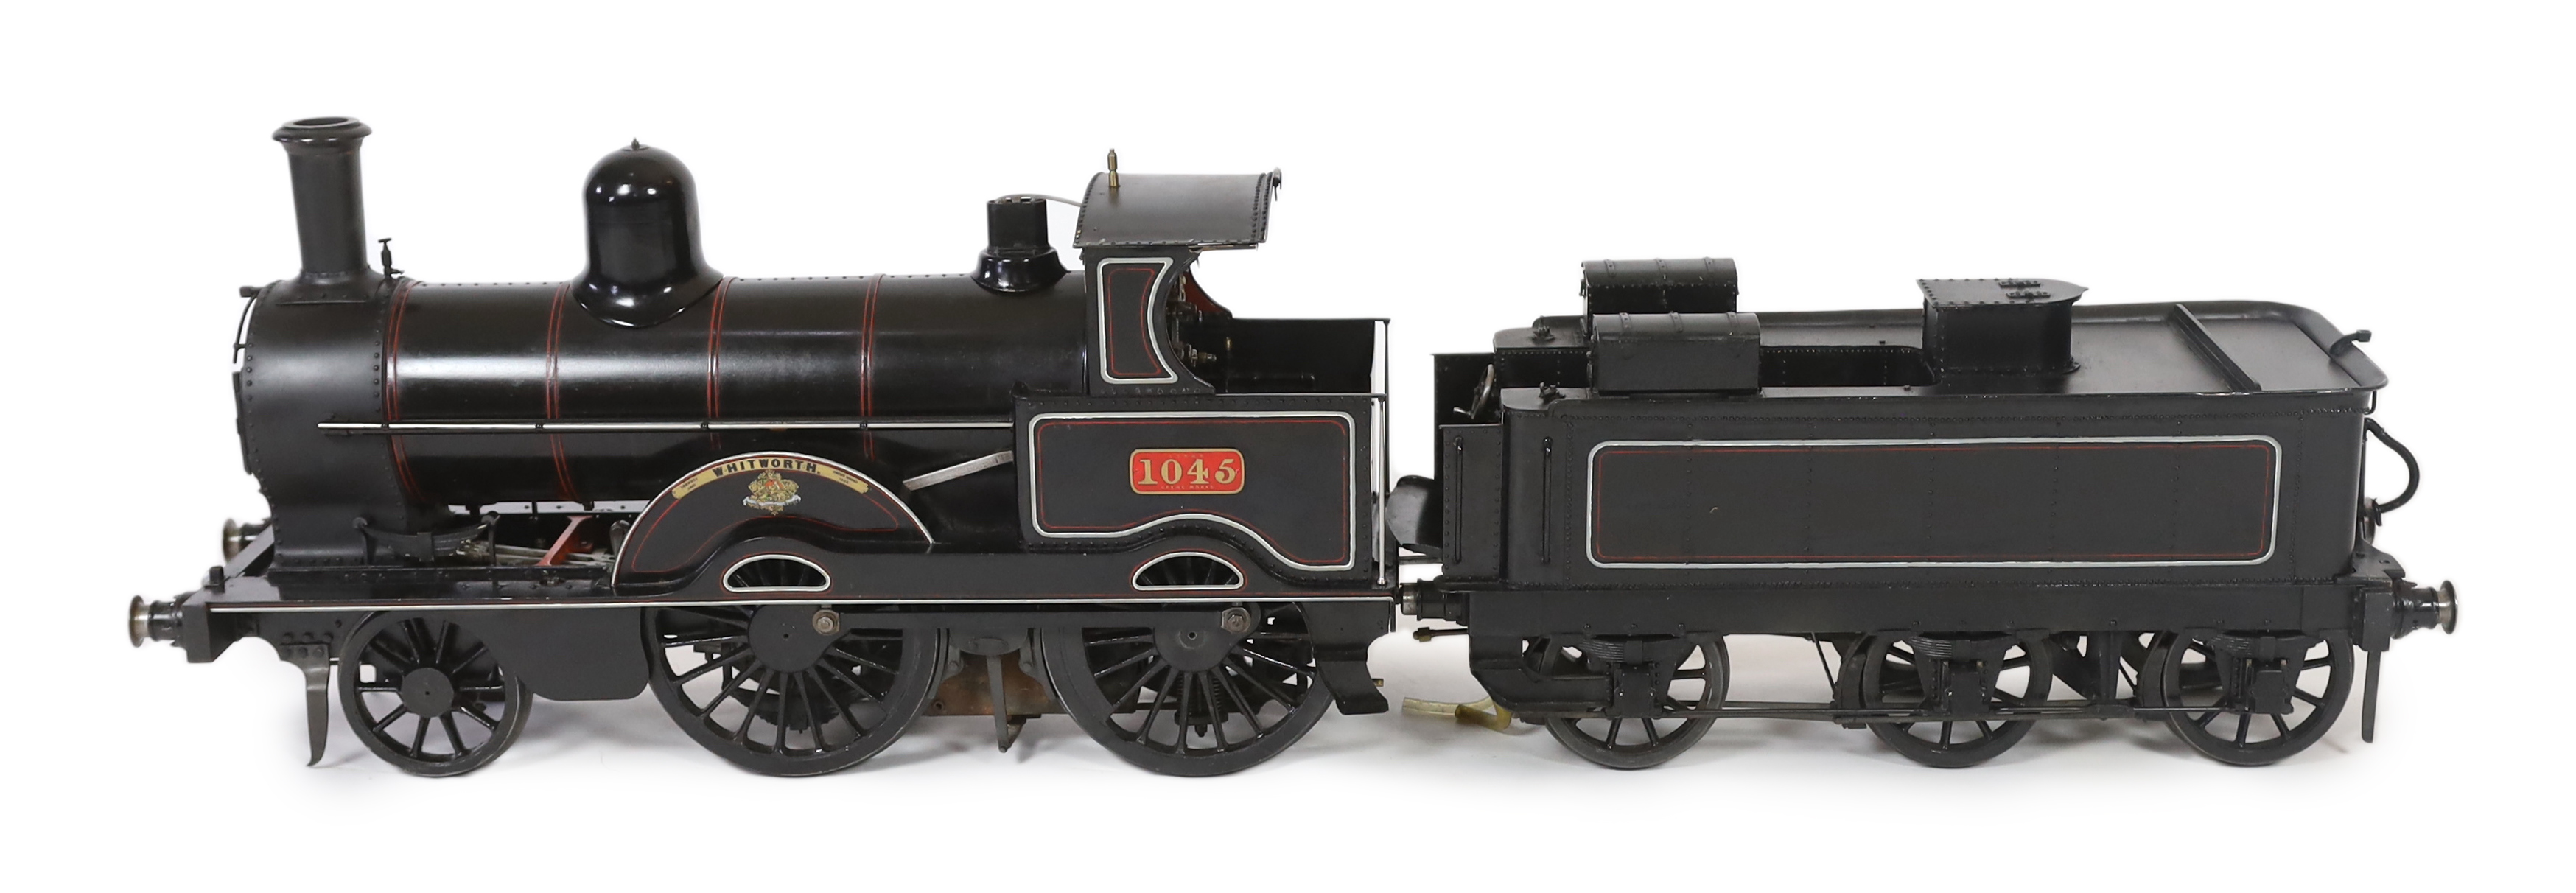 A very finely engineered scratch-built 5” gauge live steam model of a LNWR (London and North Western Railway) Jumbo 2-4-0 tender locomotive, No. 1045 ‘Whitworth’                                                           